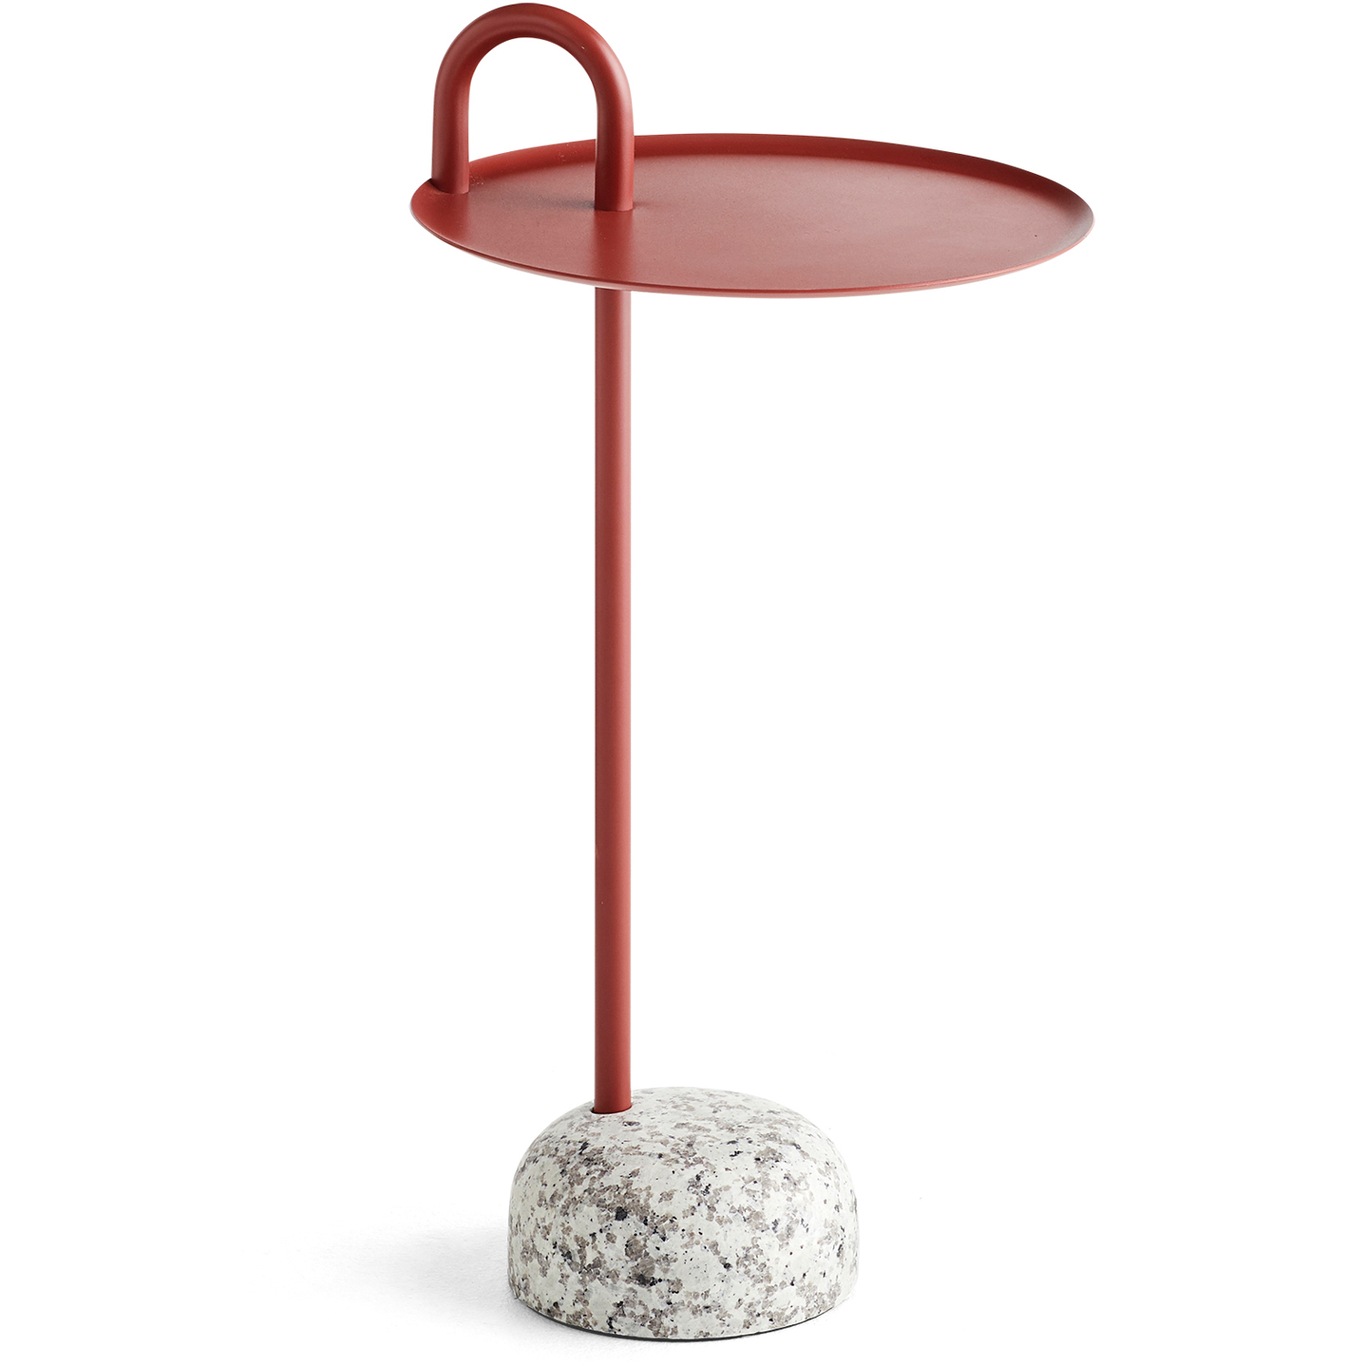 Bowler Side Table, Tile Red